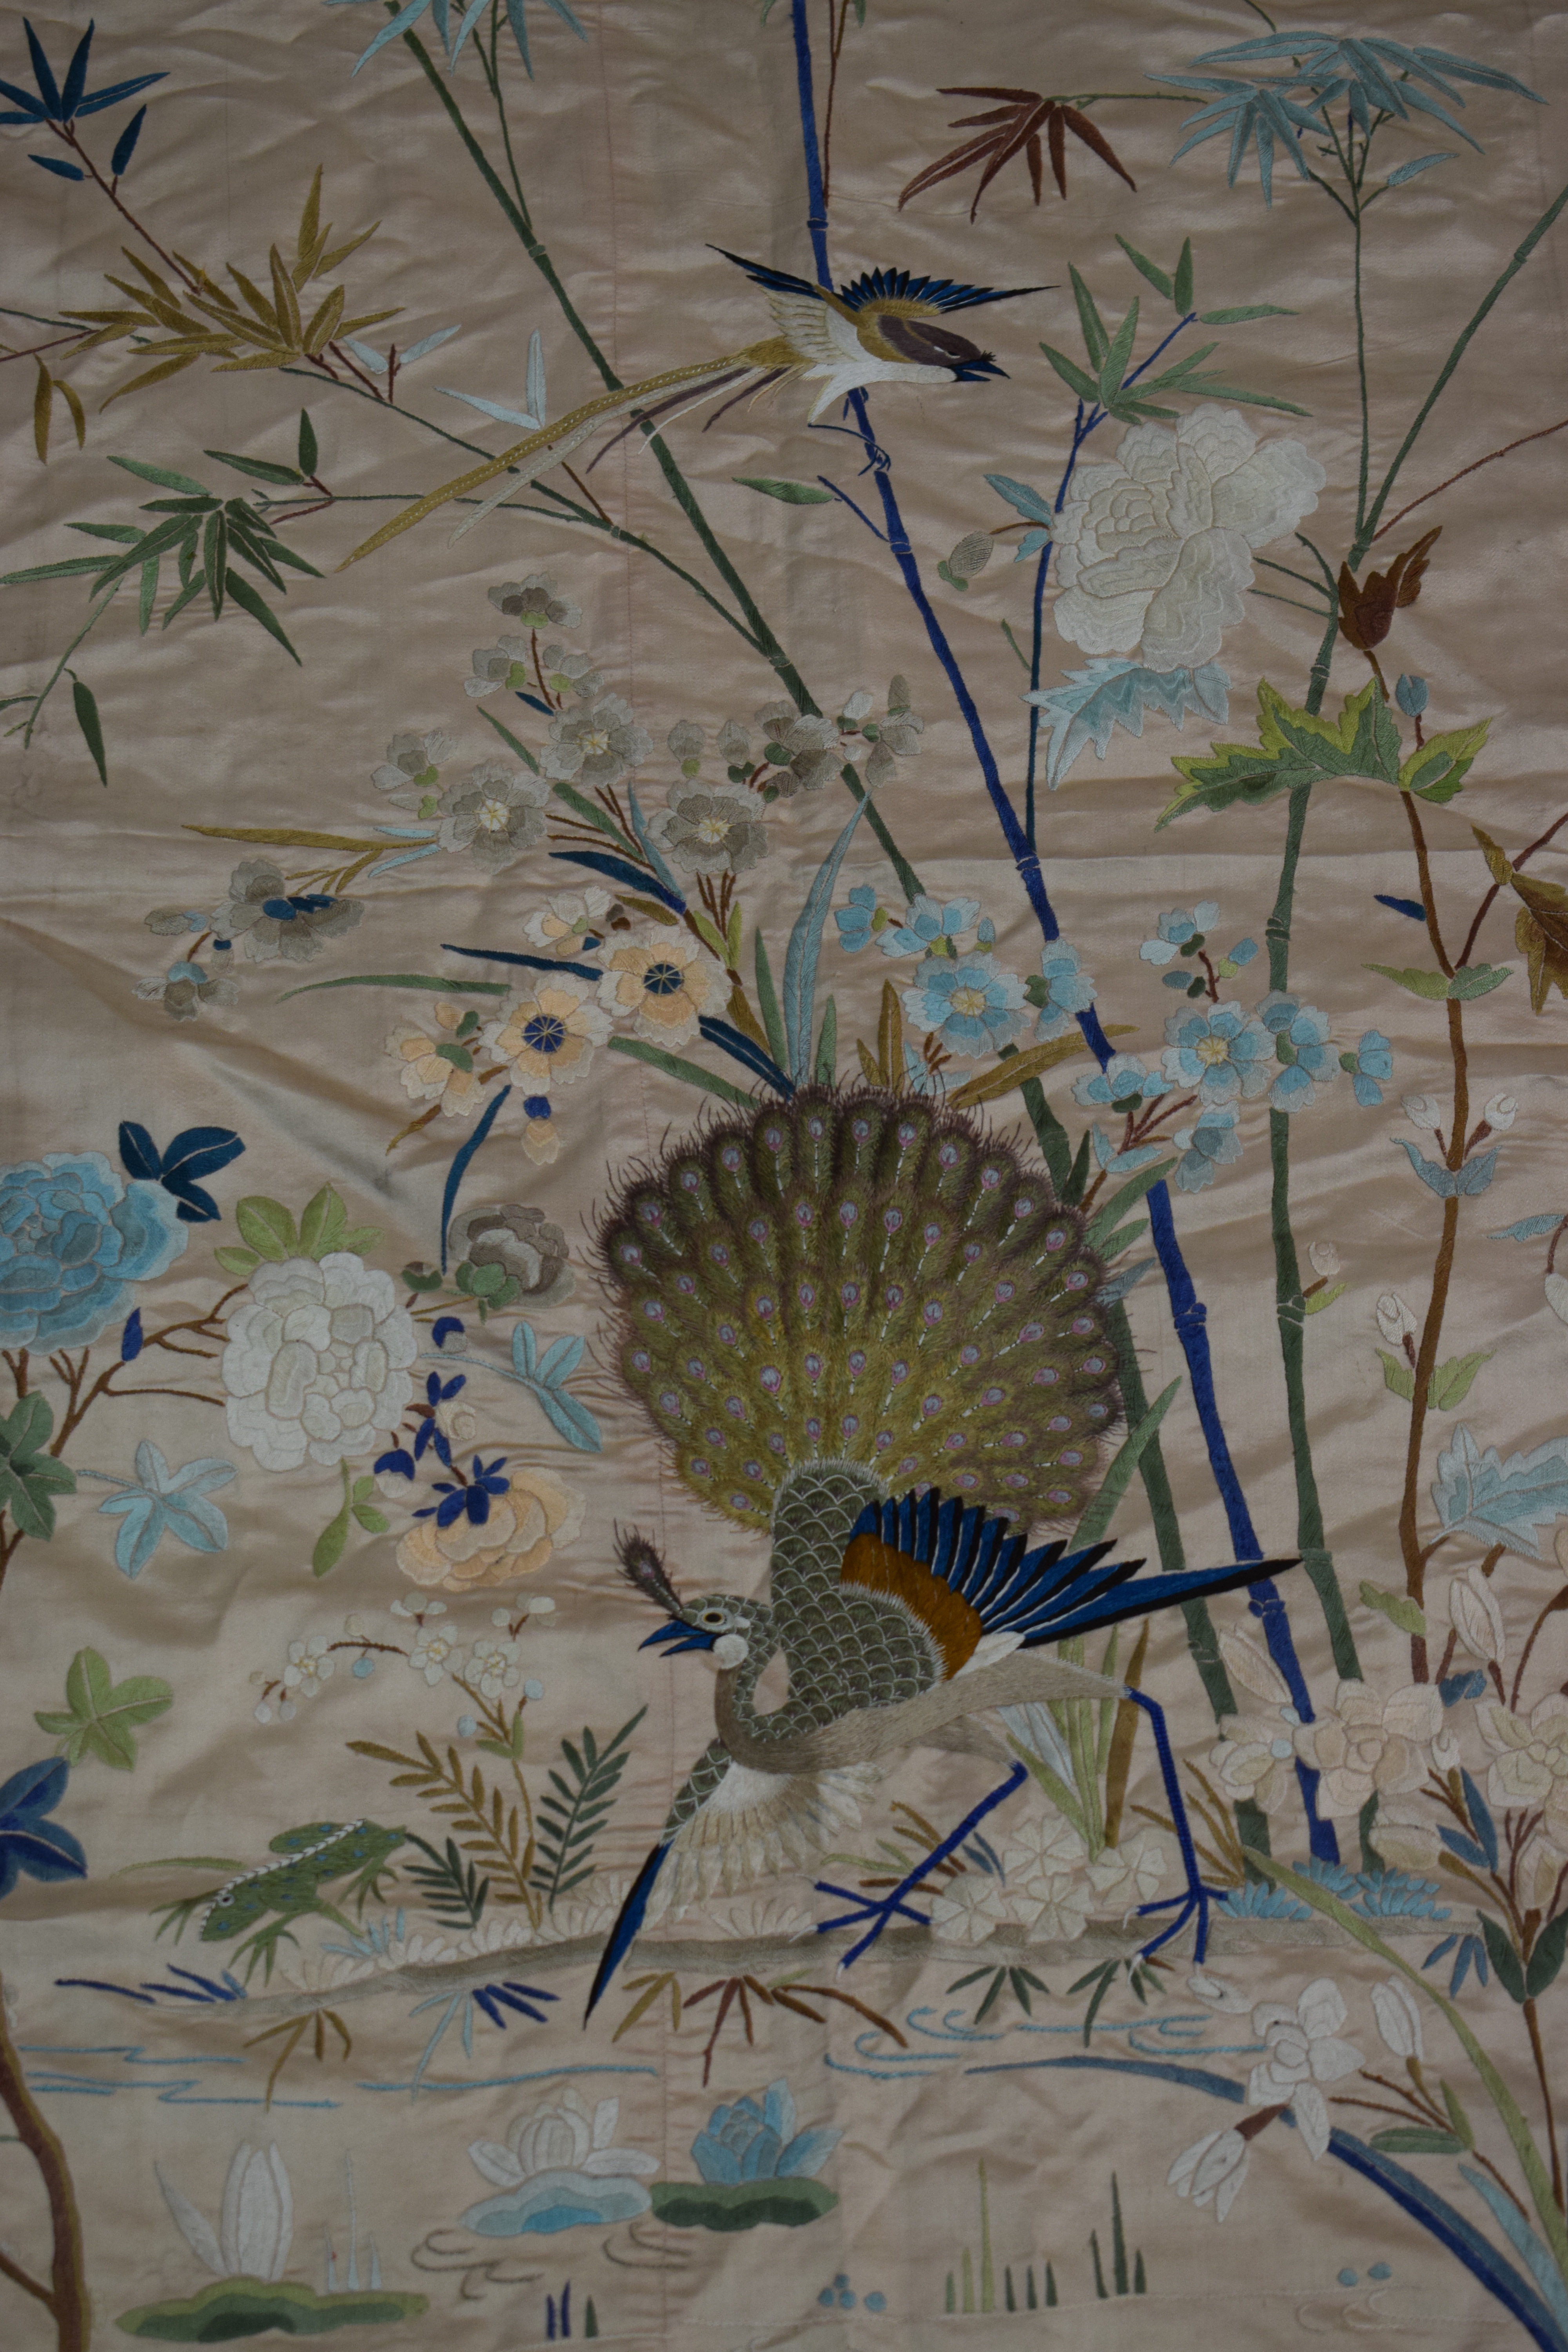 Chinese pale peach silk satin shawl or cover, first half 20th century, 51in. 130cm. Square. Very - Image 12 of 13